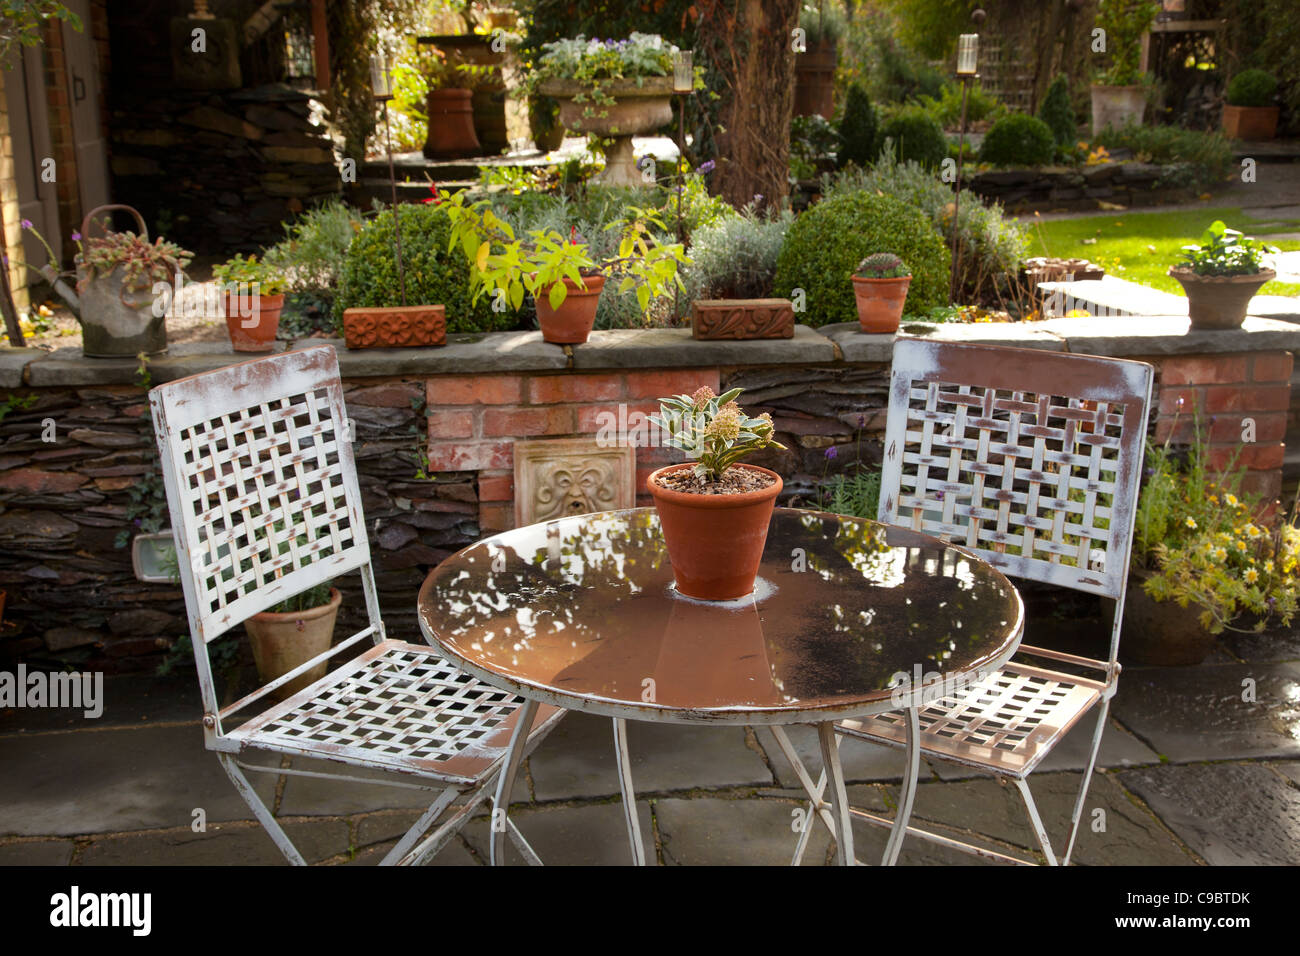 Metal table and chairs on stone patio in english autumn garden Stock Photo